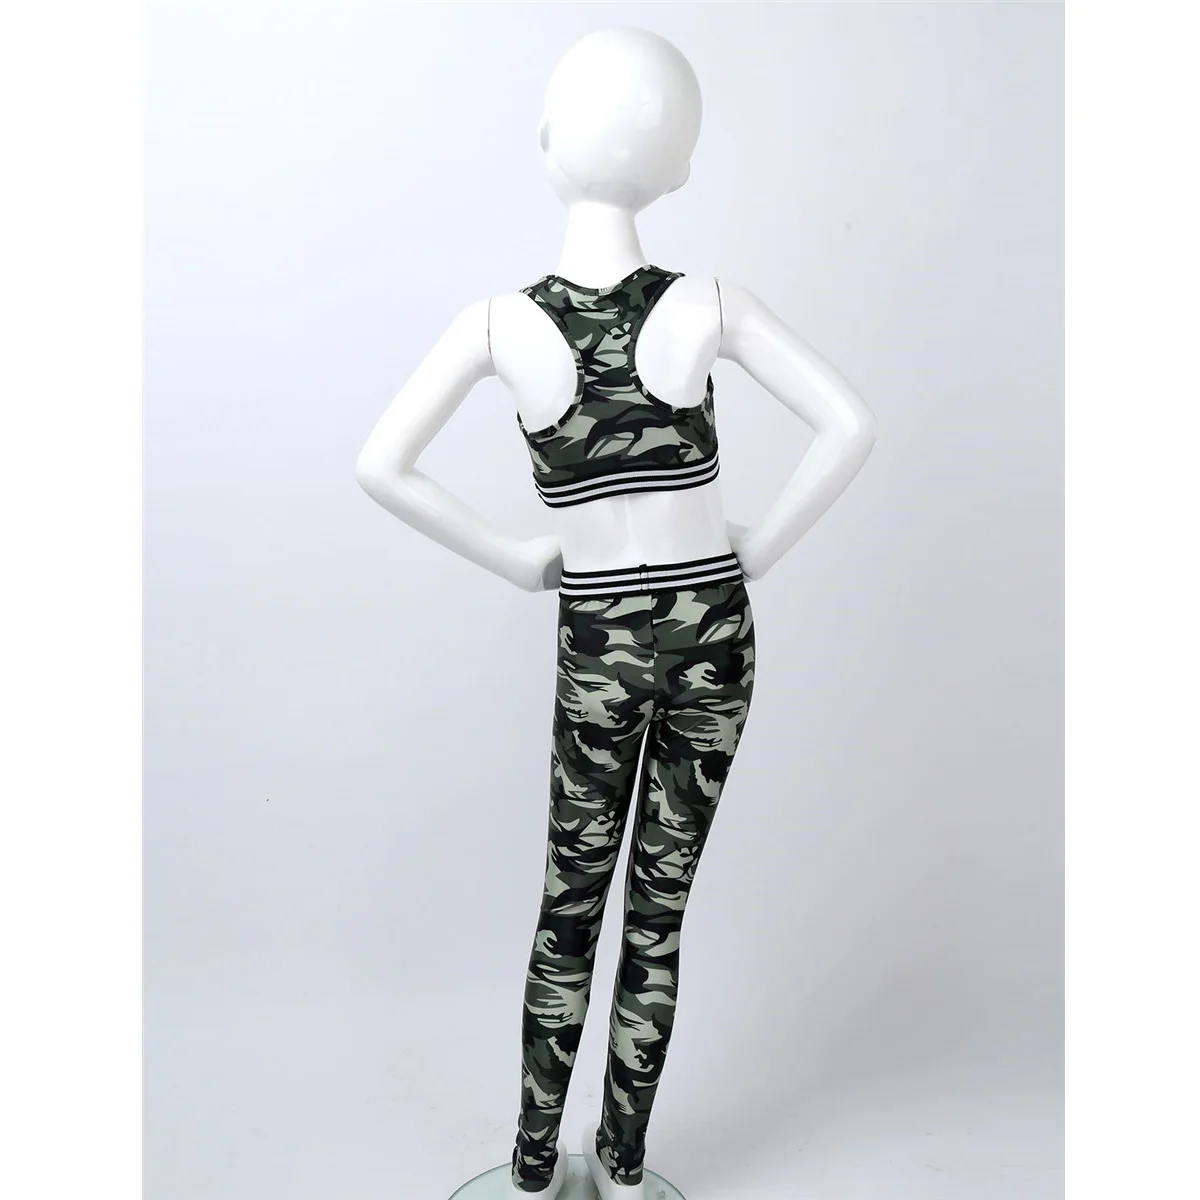 GW CLASSYOUTFIT Girls Kids T-Shirts & Shorts Set Army Camouflage Vest Tops hot Pants Racer Back